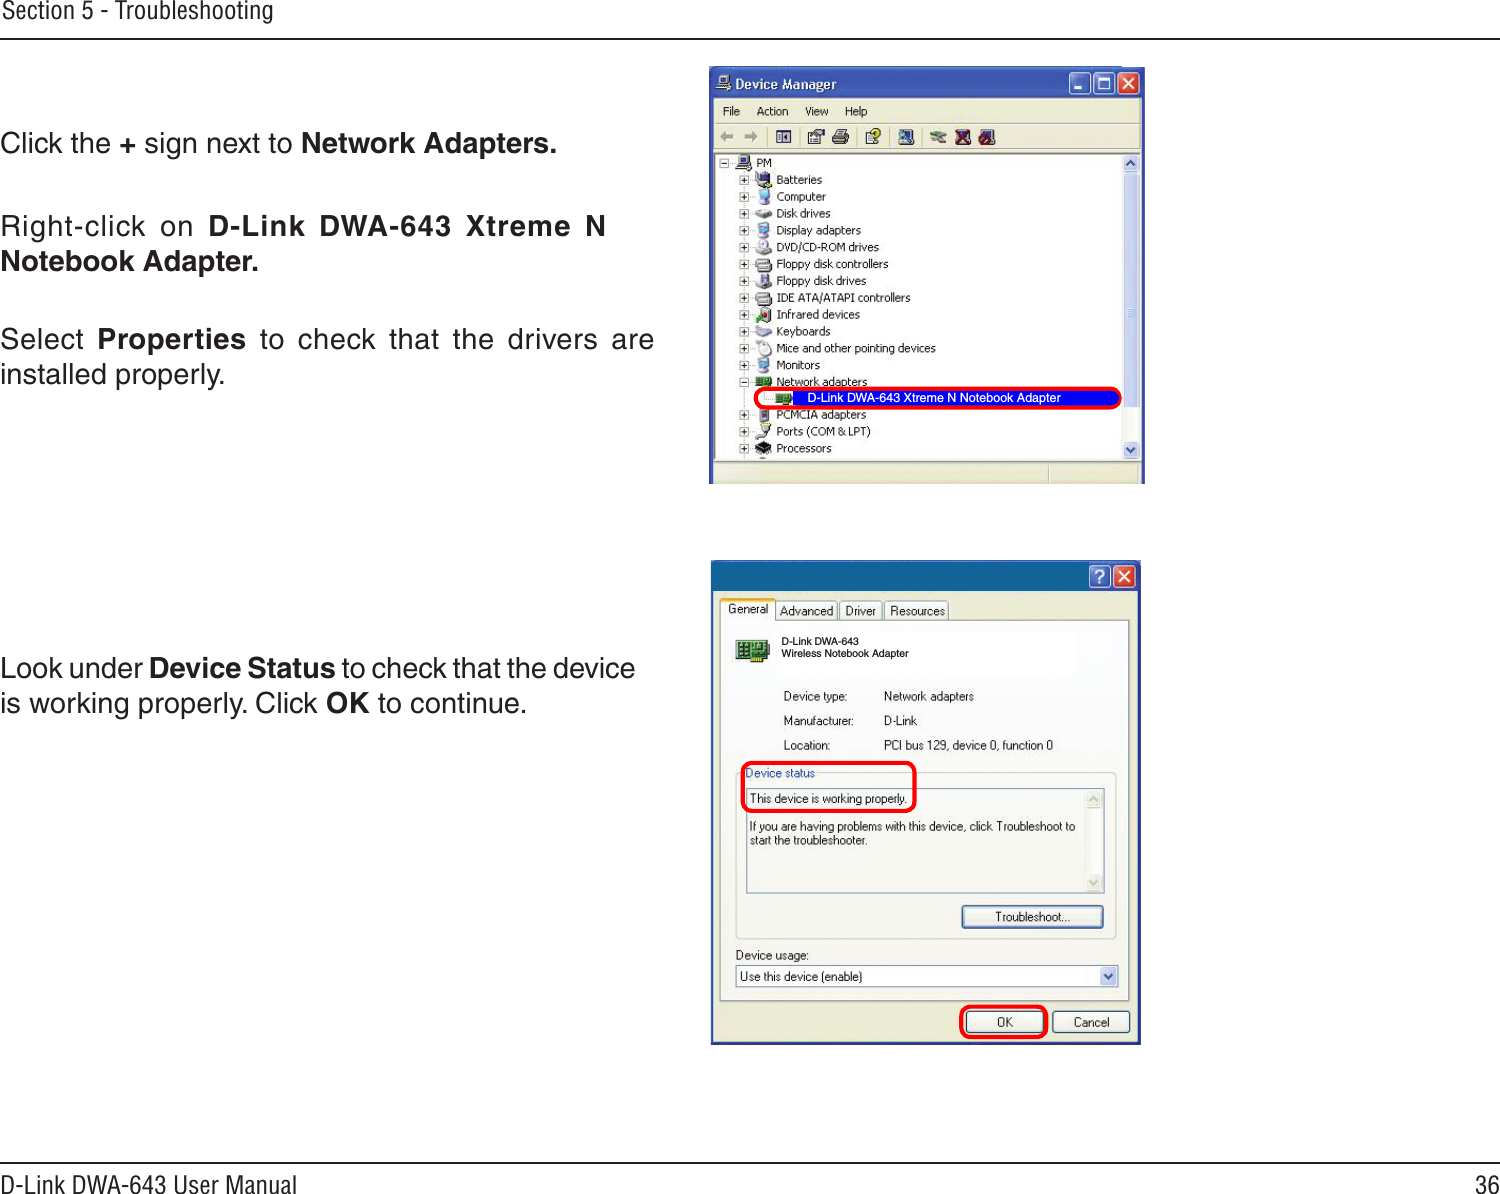 36D-Link DWA-643 User ManualSection 5 - TroubleshootingClick the + sign next to Network Adapters.Right-click  on  D-Link  DWA-643  Xtreme  N Notebook Adapter.Select  Properties  to  check  that  the  drivers  are installed properly.Look under Device Status to check that the device is working properly. Click OK to continue.D-Link DWA-643 Xtreme N Notebook AdapterD-Link DWA-643 Wireless Notebook Adapter